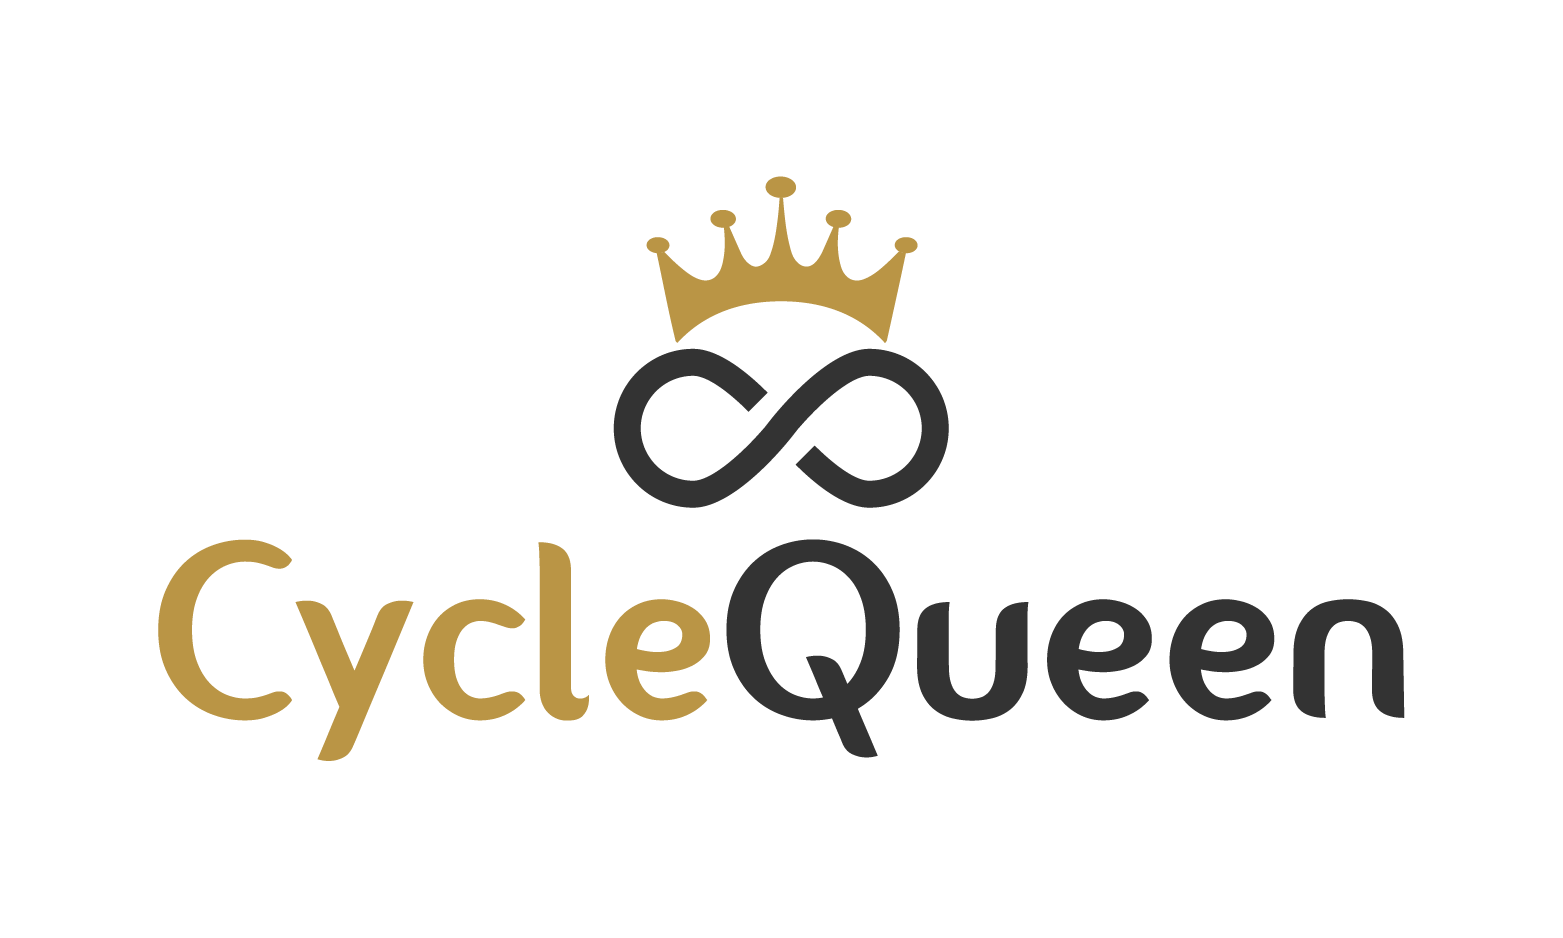 CycleQueen.com - Creative brandable domain for sale